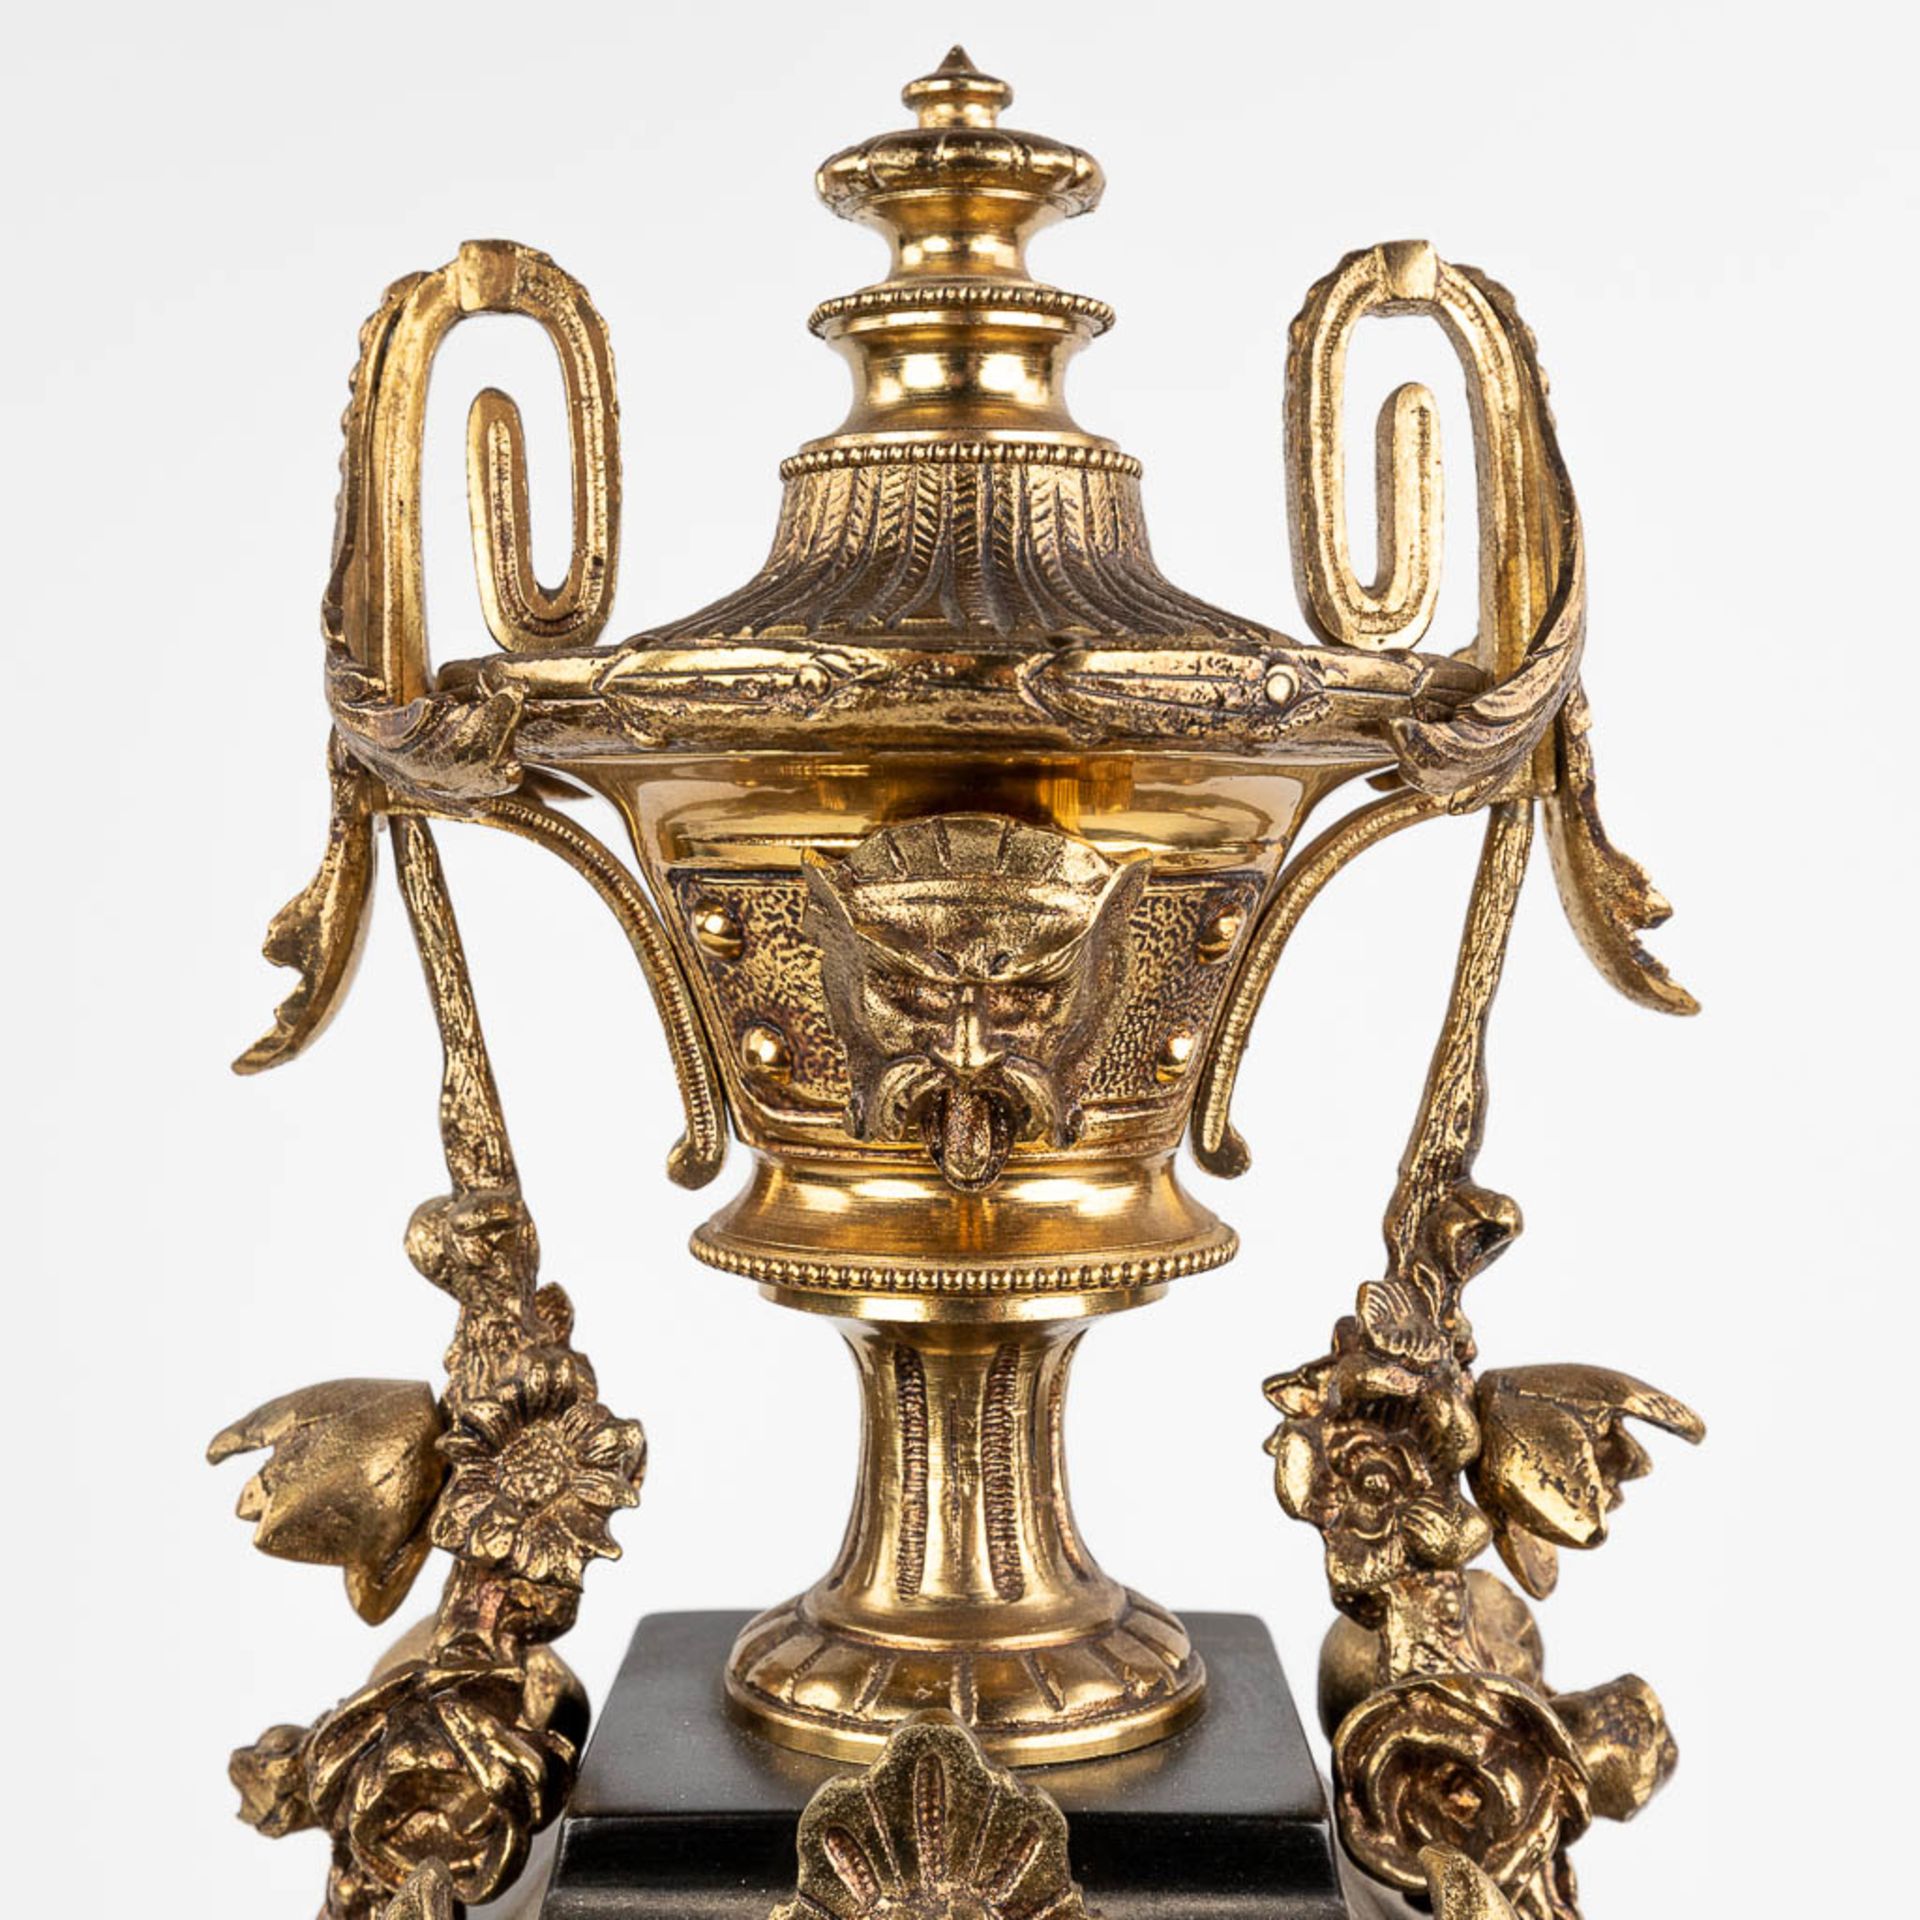 A three-piece mantle garniture clock and candelabra, Louis XV style. Circa 1970. (D:25 x W:51 x H:55 - Image 7 of 14